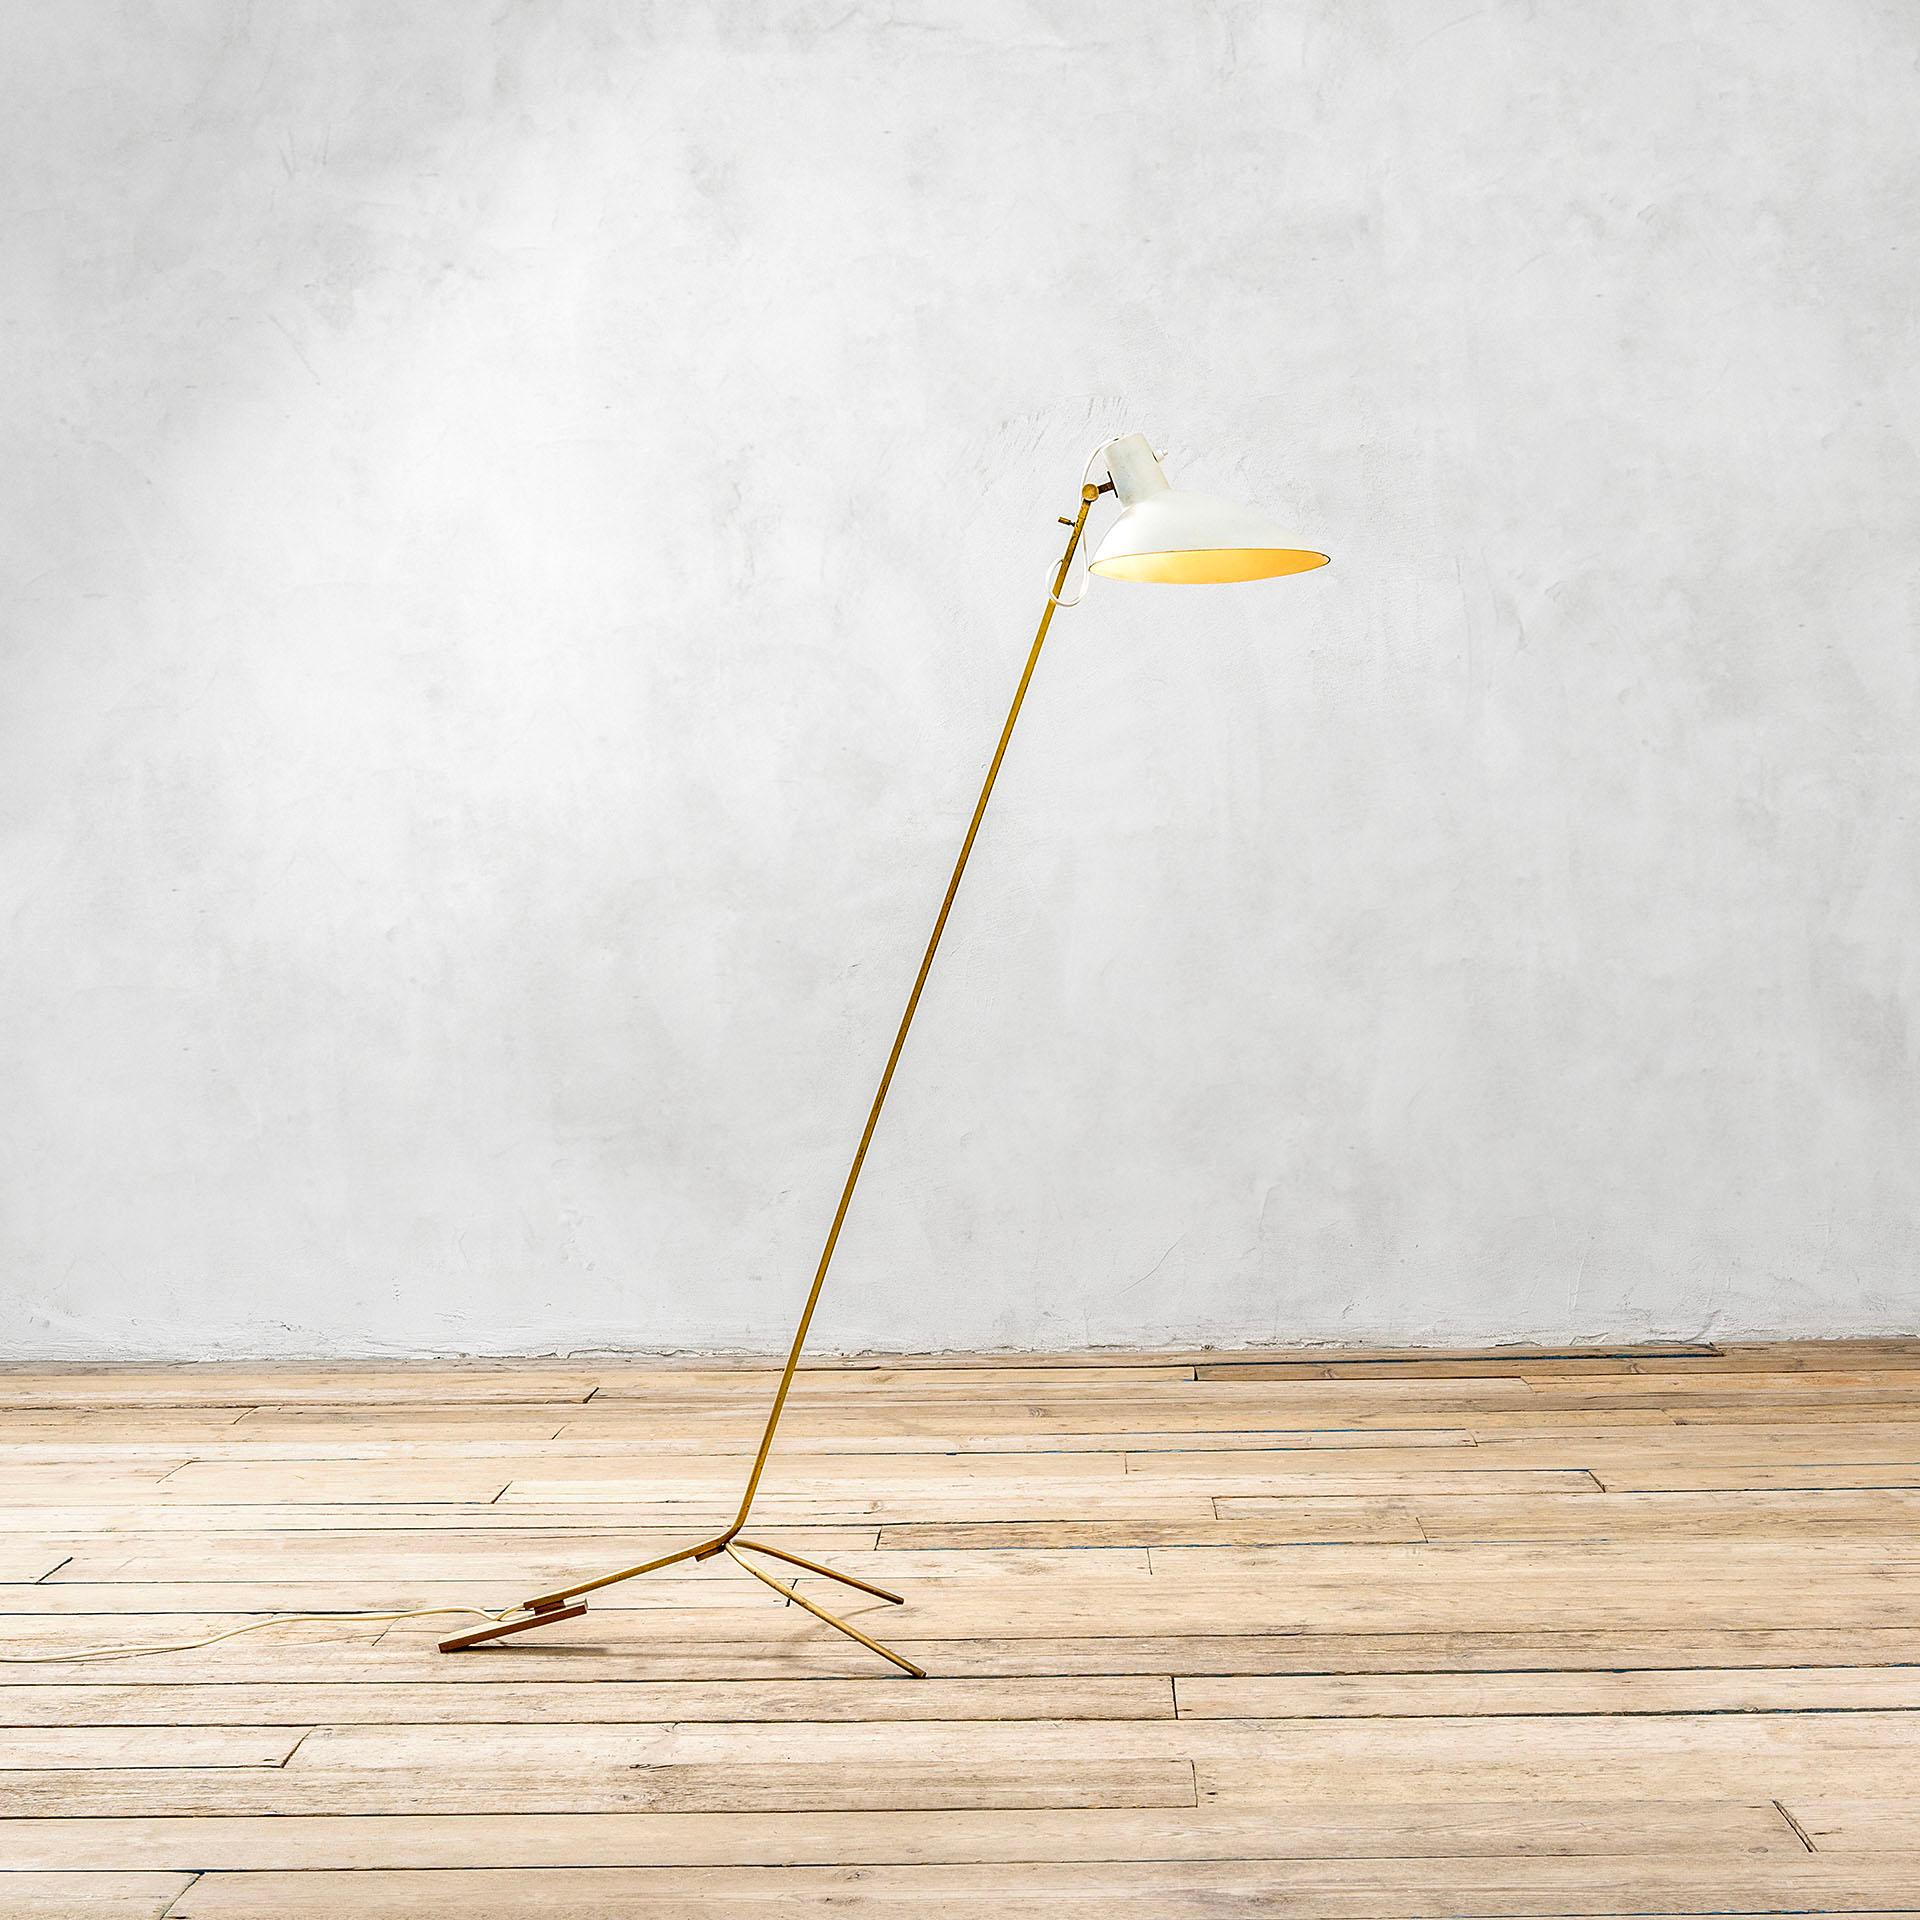 Italian 20th Century Vittoriano Viganò Floor Lamps Mod. 1047 for Arteluce, Early 50s For Sale